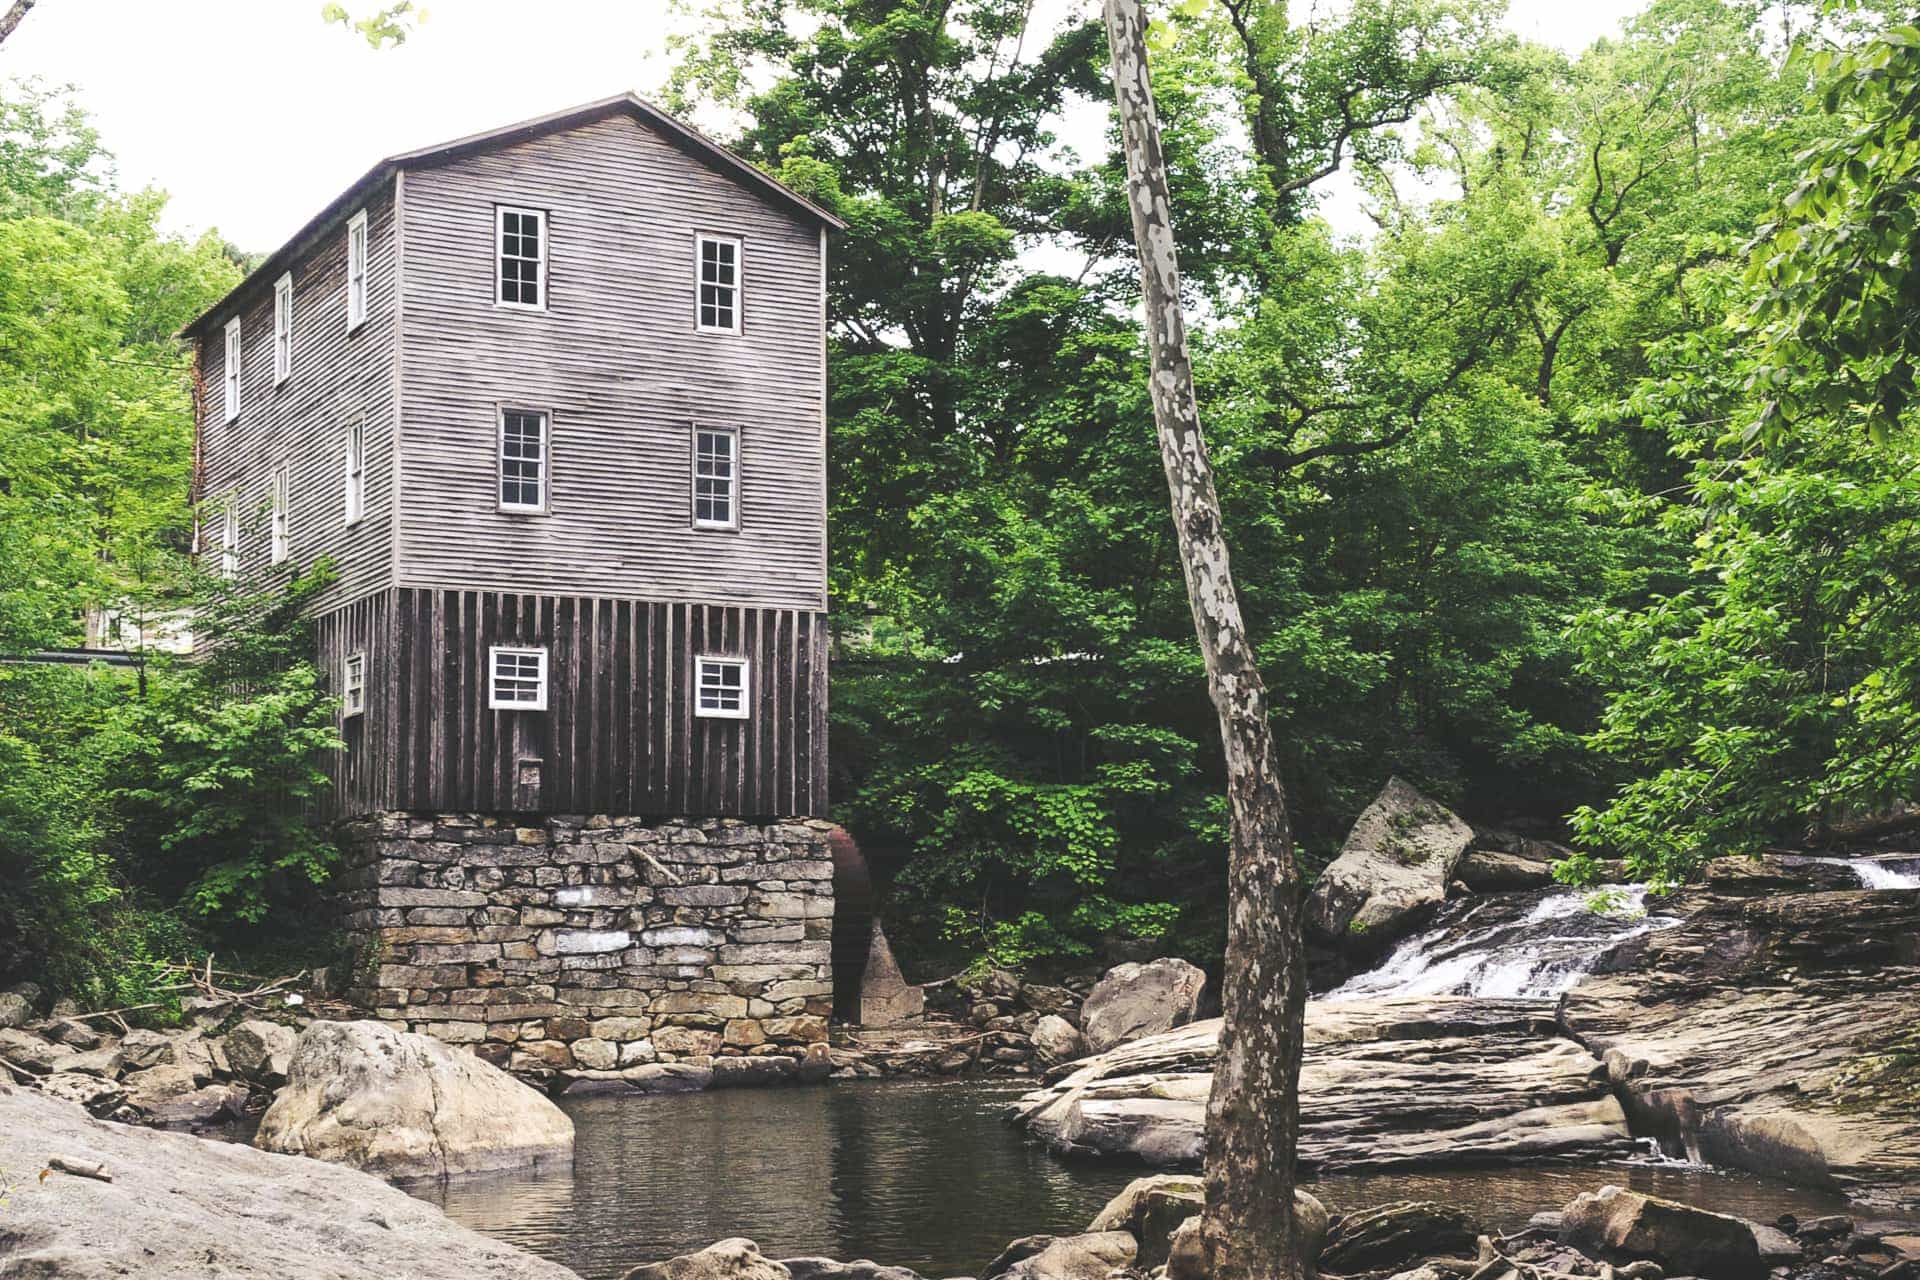 Fidler's Mill (Photo by Jerrye and Roy Klotz - https://creativecommons.org/licenses/by-sa/4.0)